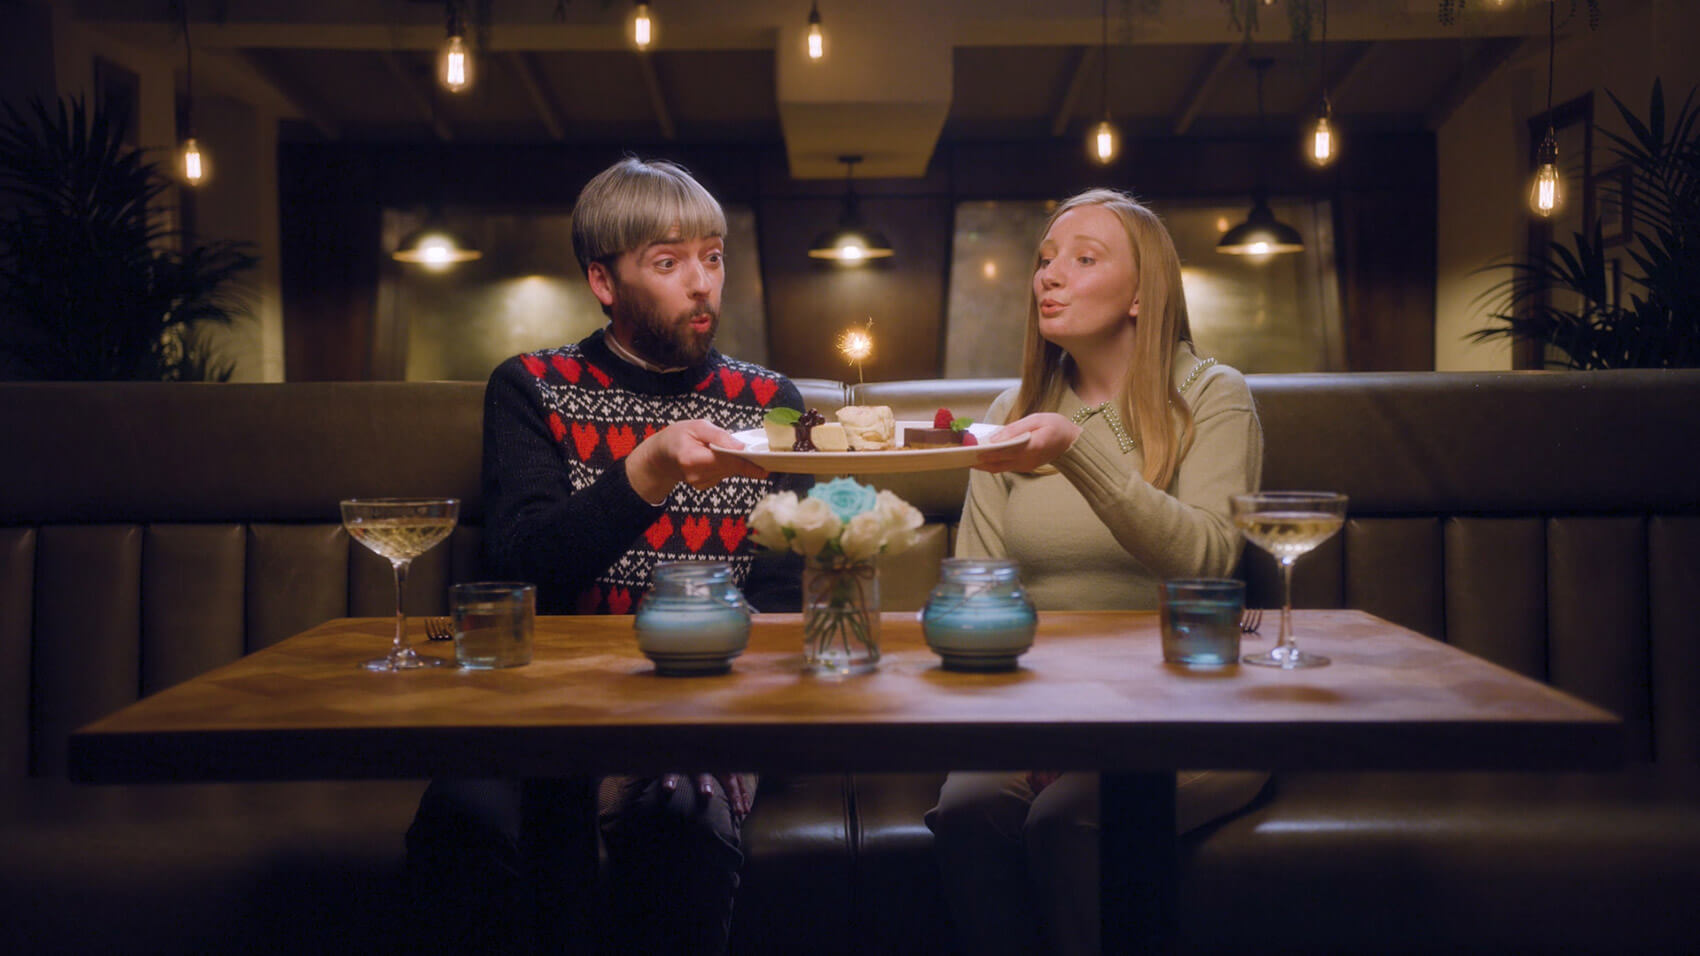 A couple in a restaurant on Valentines Day blowing out a sparkler on top of a dessert plate in a Buy A Gift ad, an example of branded content